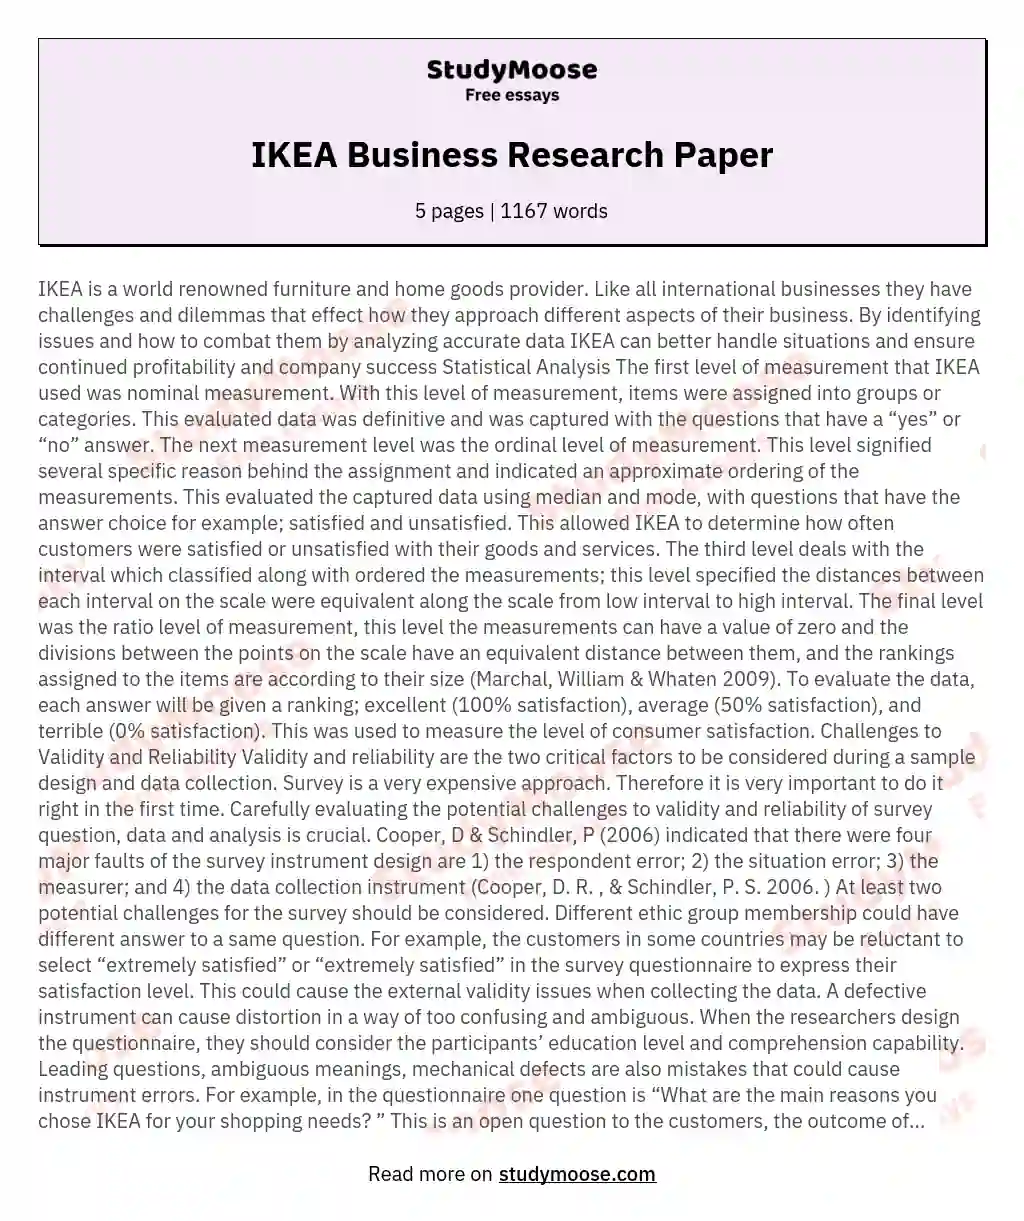 business law research paper topics